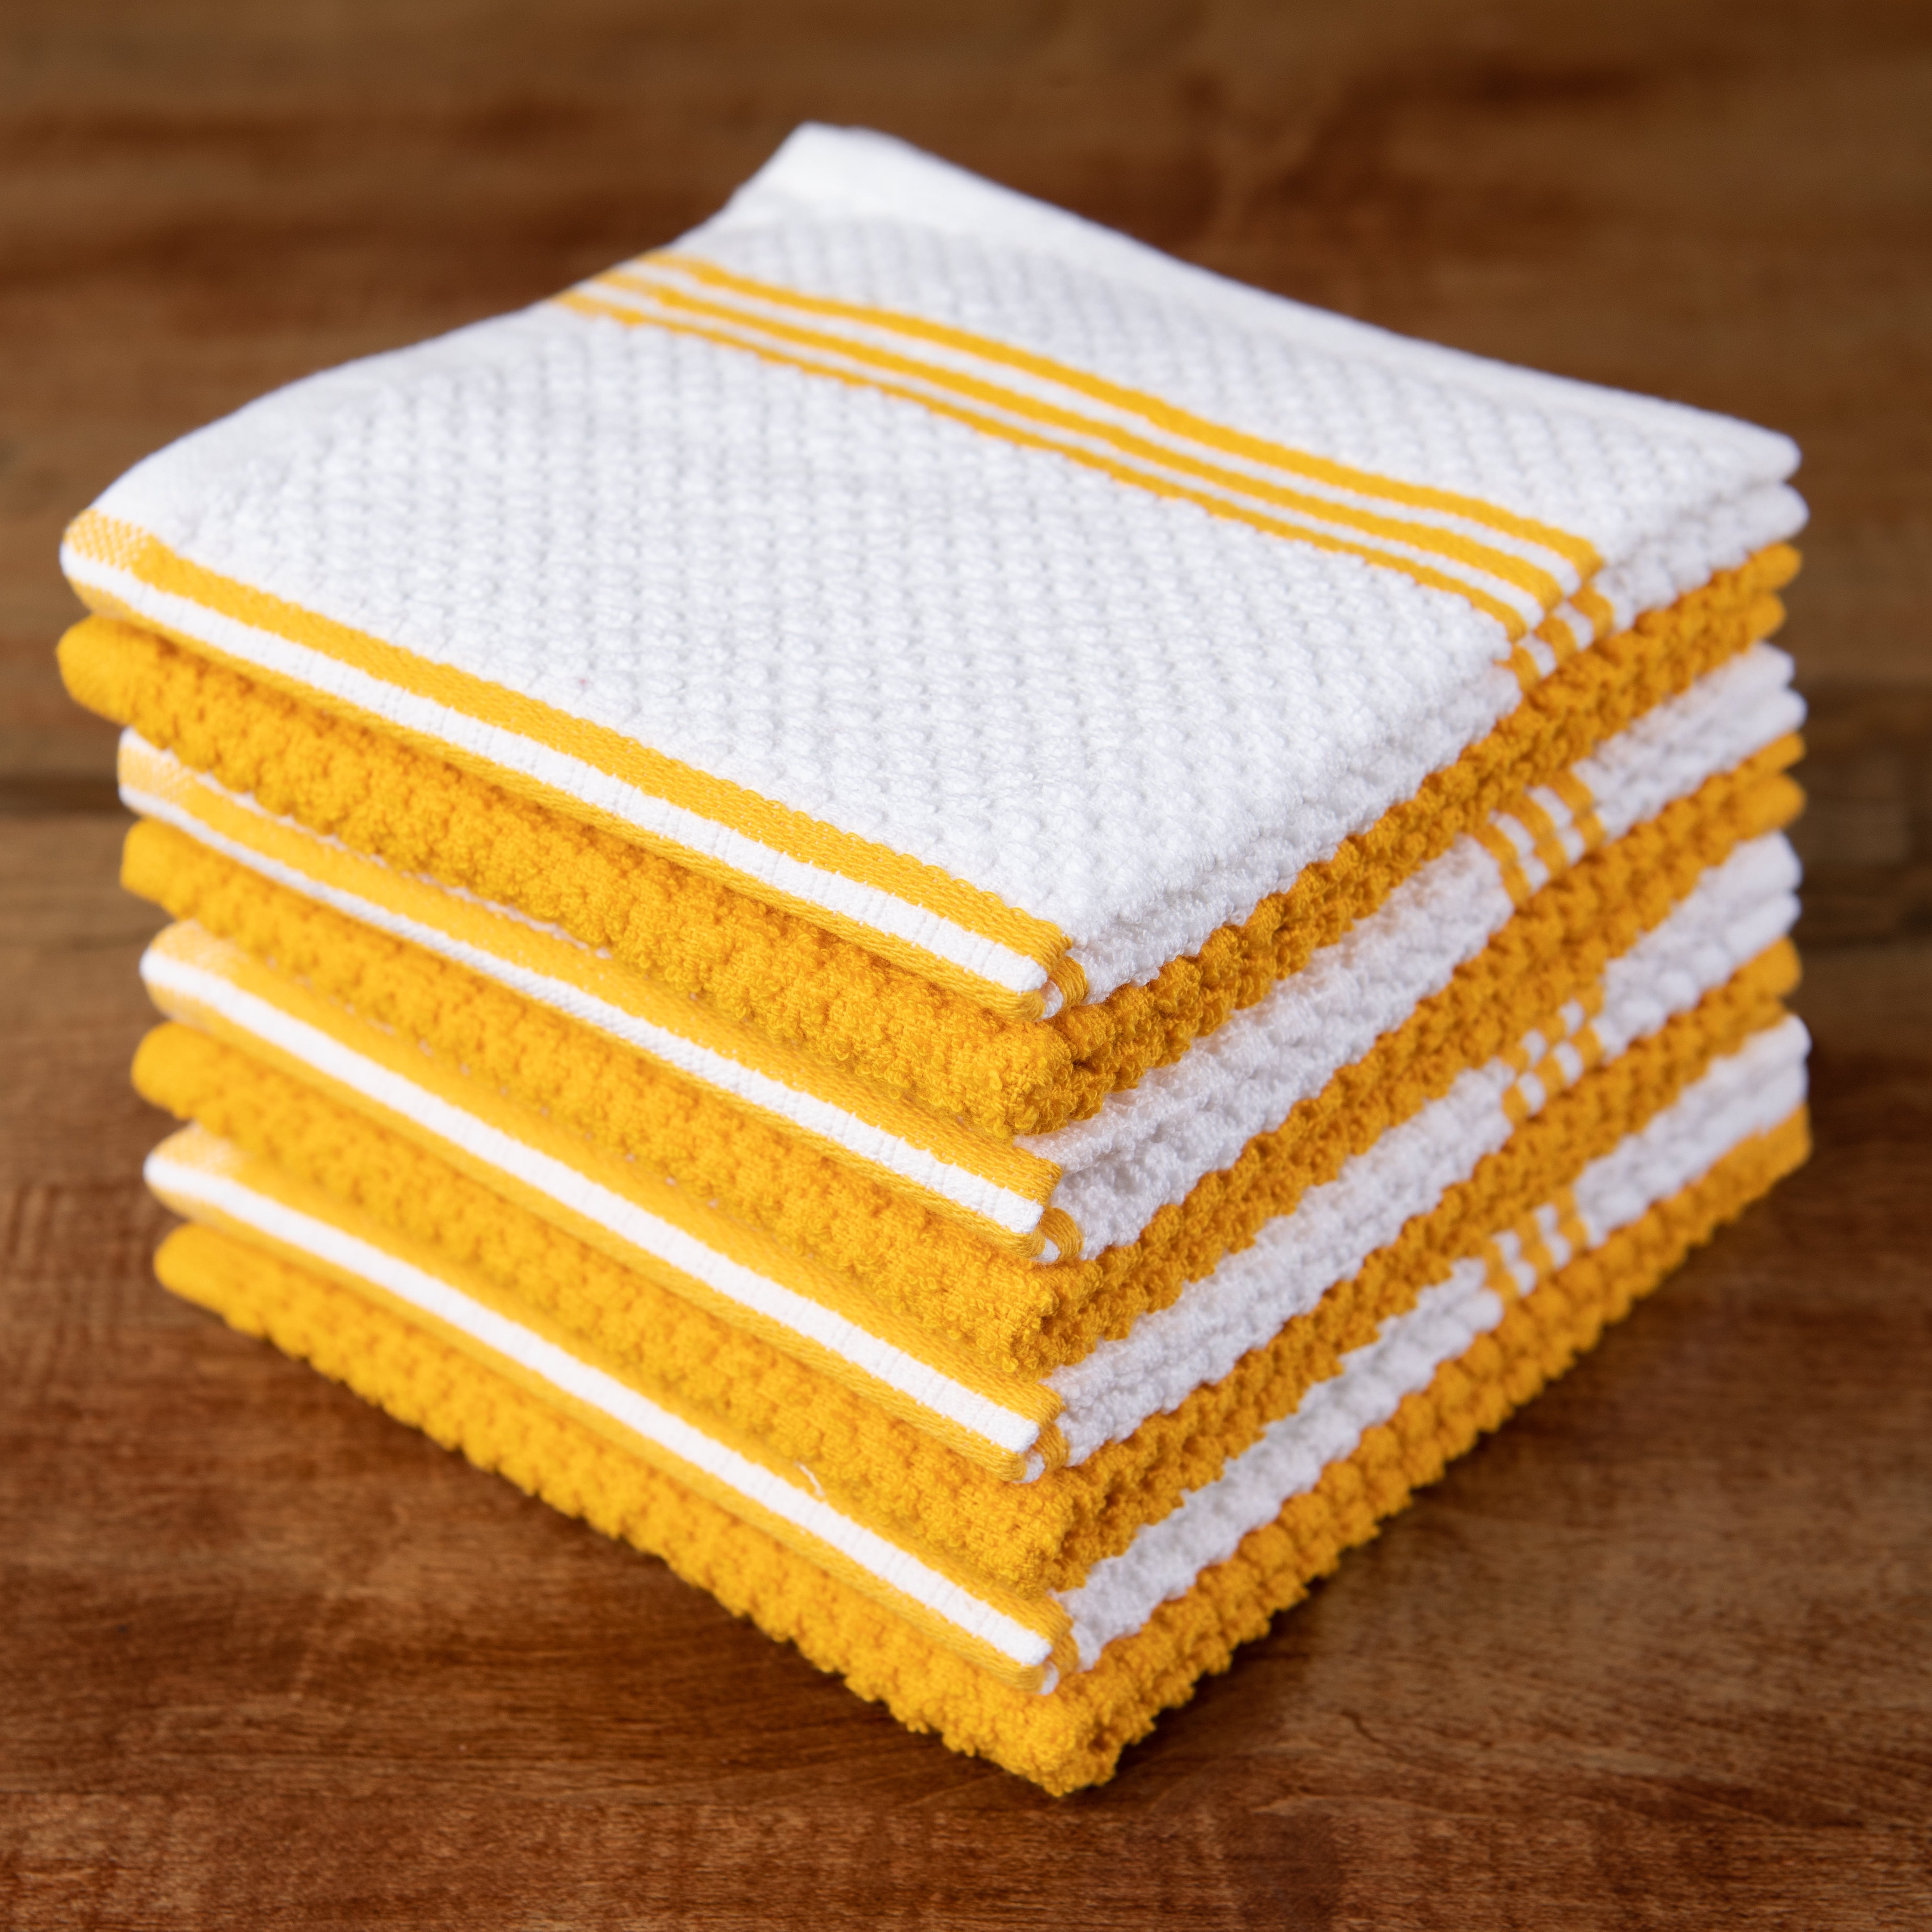 36 x 80 cm Soft Large Towel Bath Towel - Ideal for Everyday Use Christmas Clothes Threshold Kitchen Towels Dish Dish Washcloth Kitchen Counter Towels